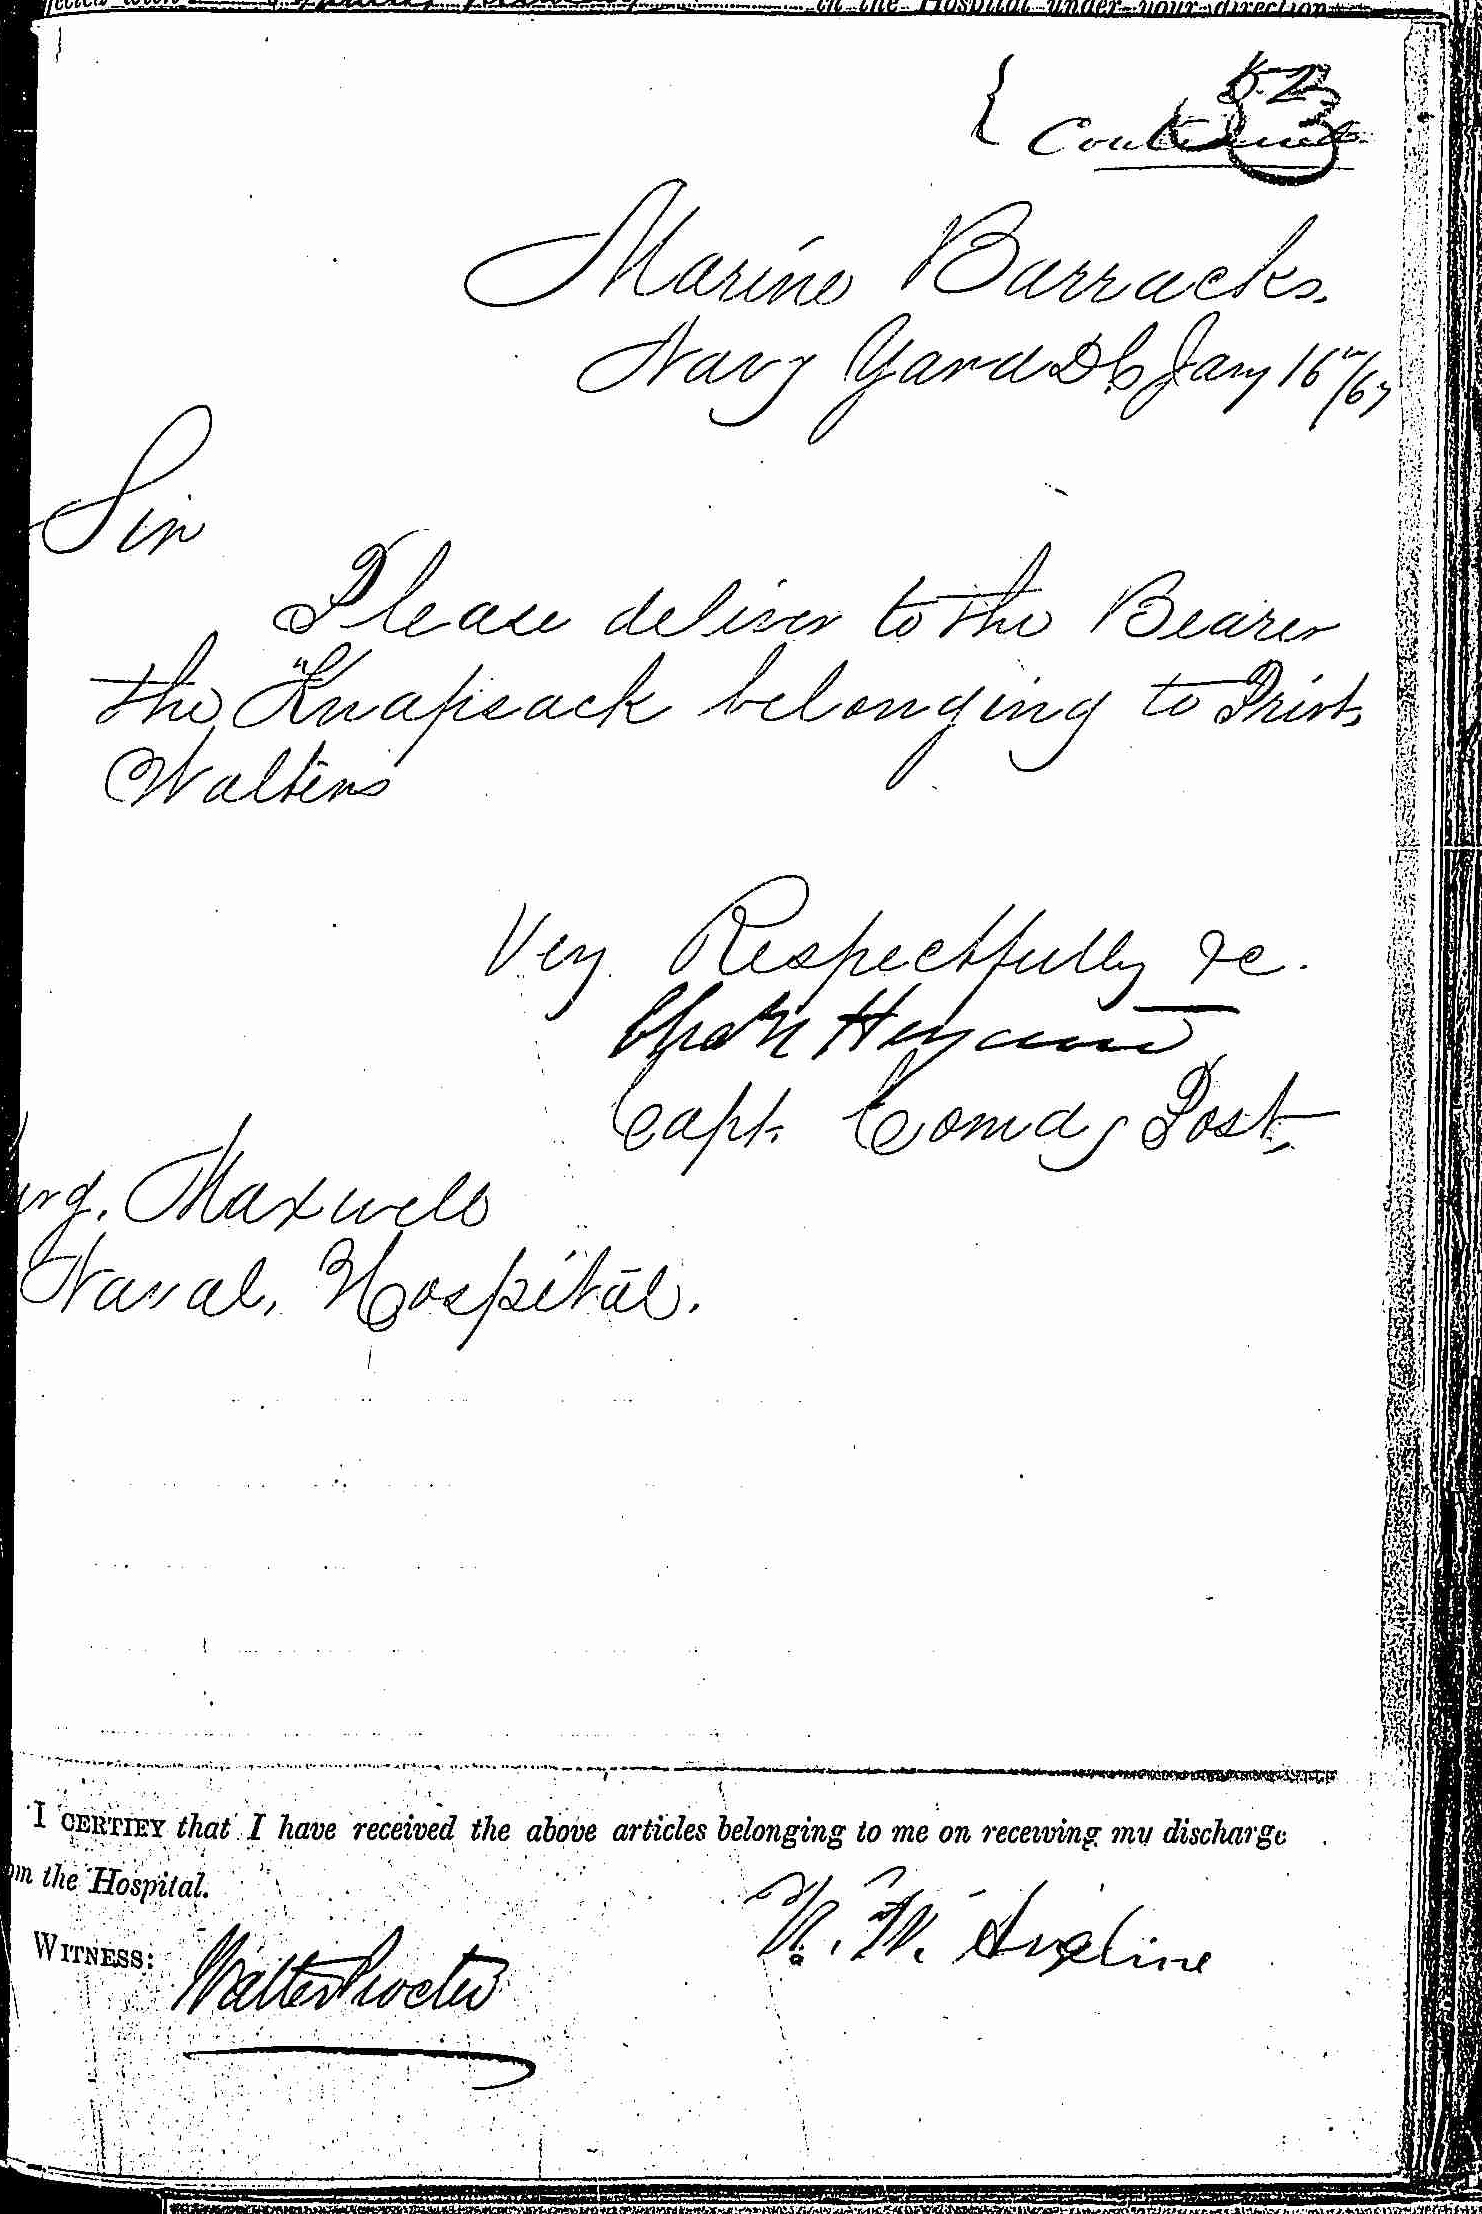 Entry for Edward Walters (first admission page 3 of 4) in the log Hospital Tickets and Case Papers - Naval Hospital - Washington, D.C. - 1865-68